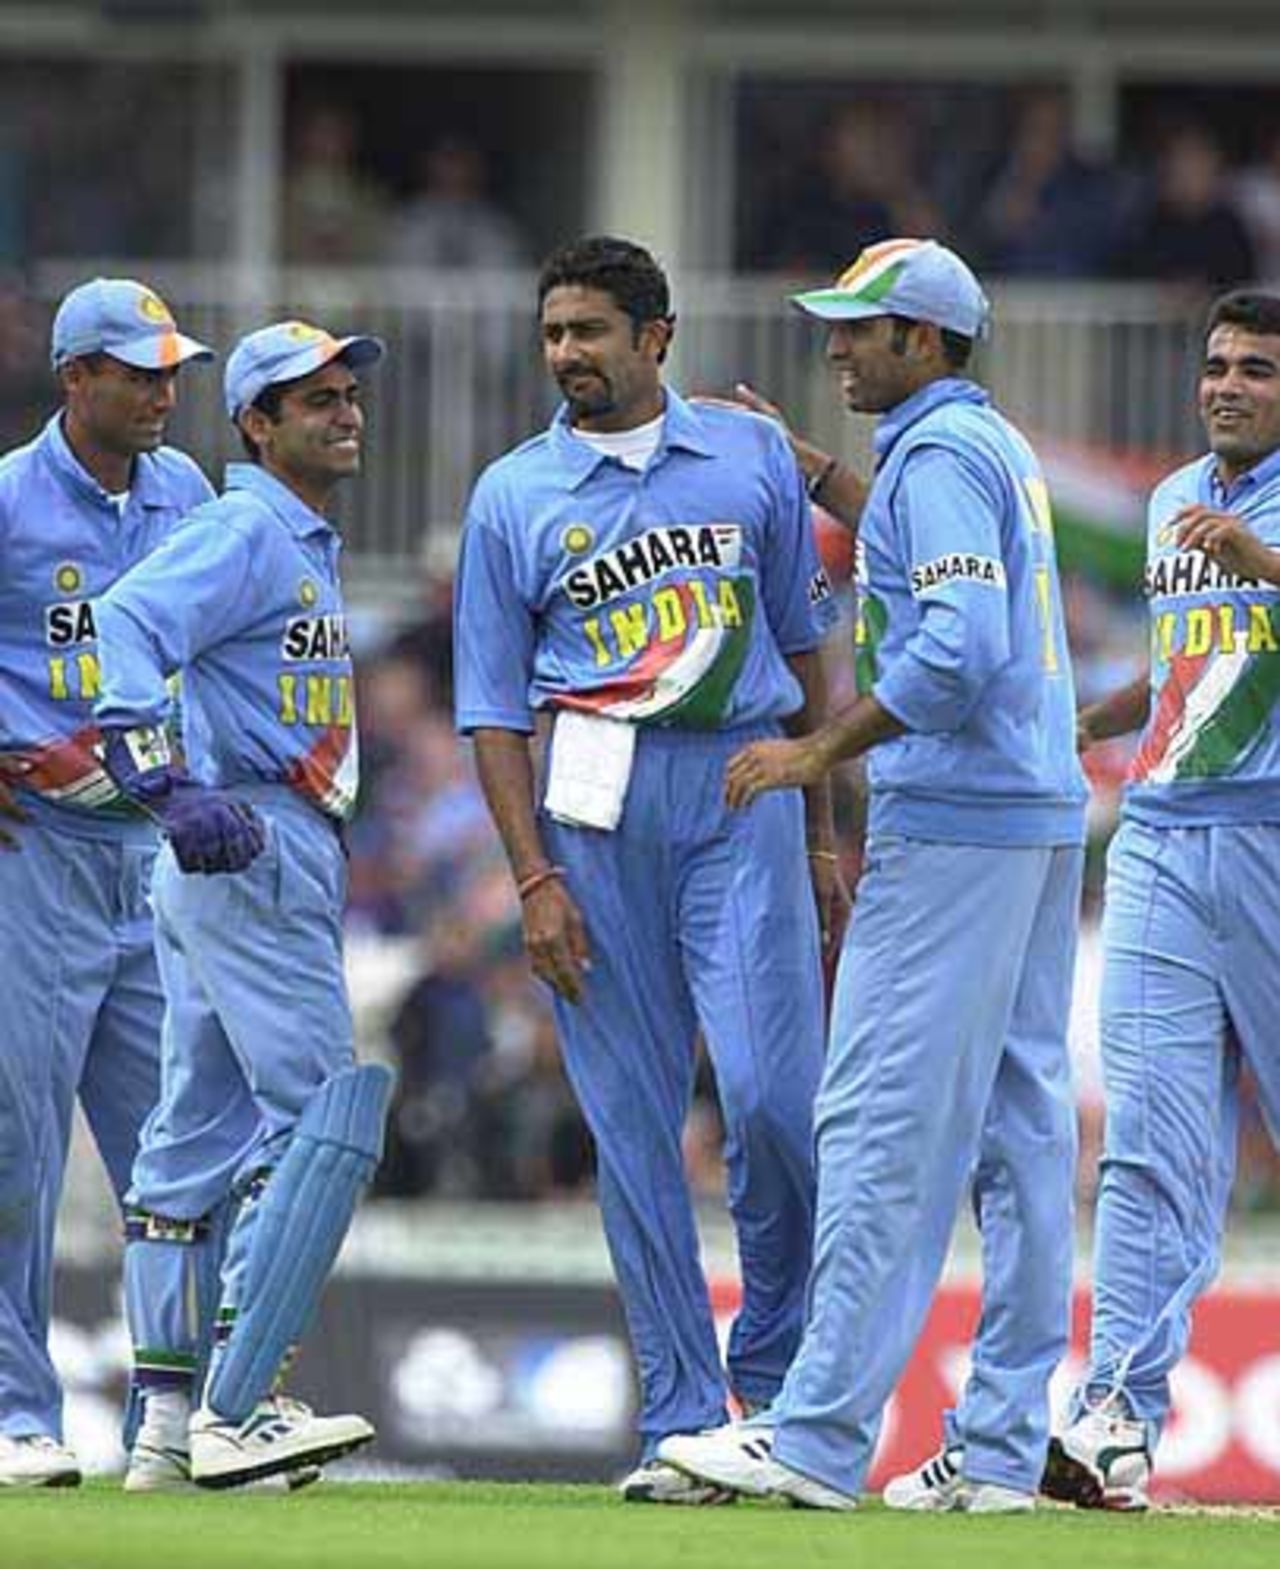 Anil Kumble is congratulated after bowling Trescothick with his first ball of the game, England v India at The Oval, July 2002